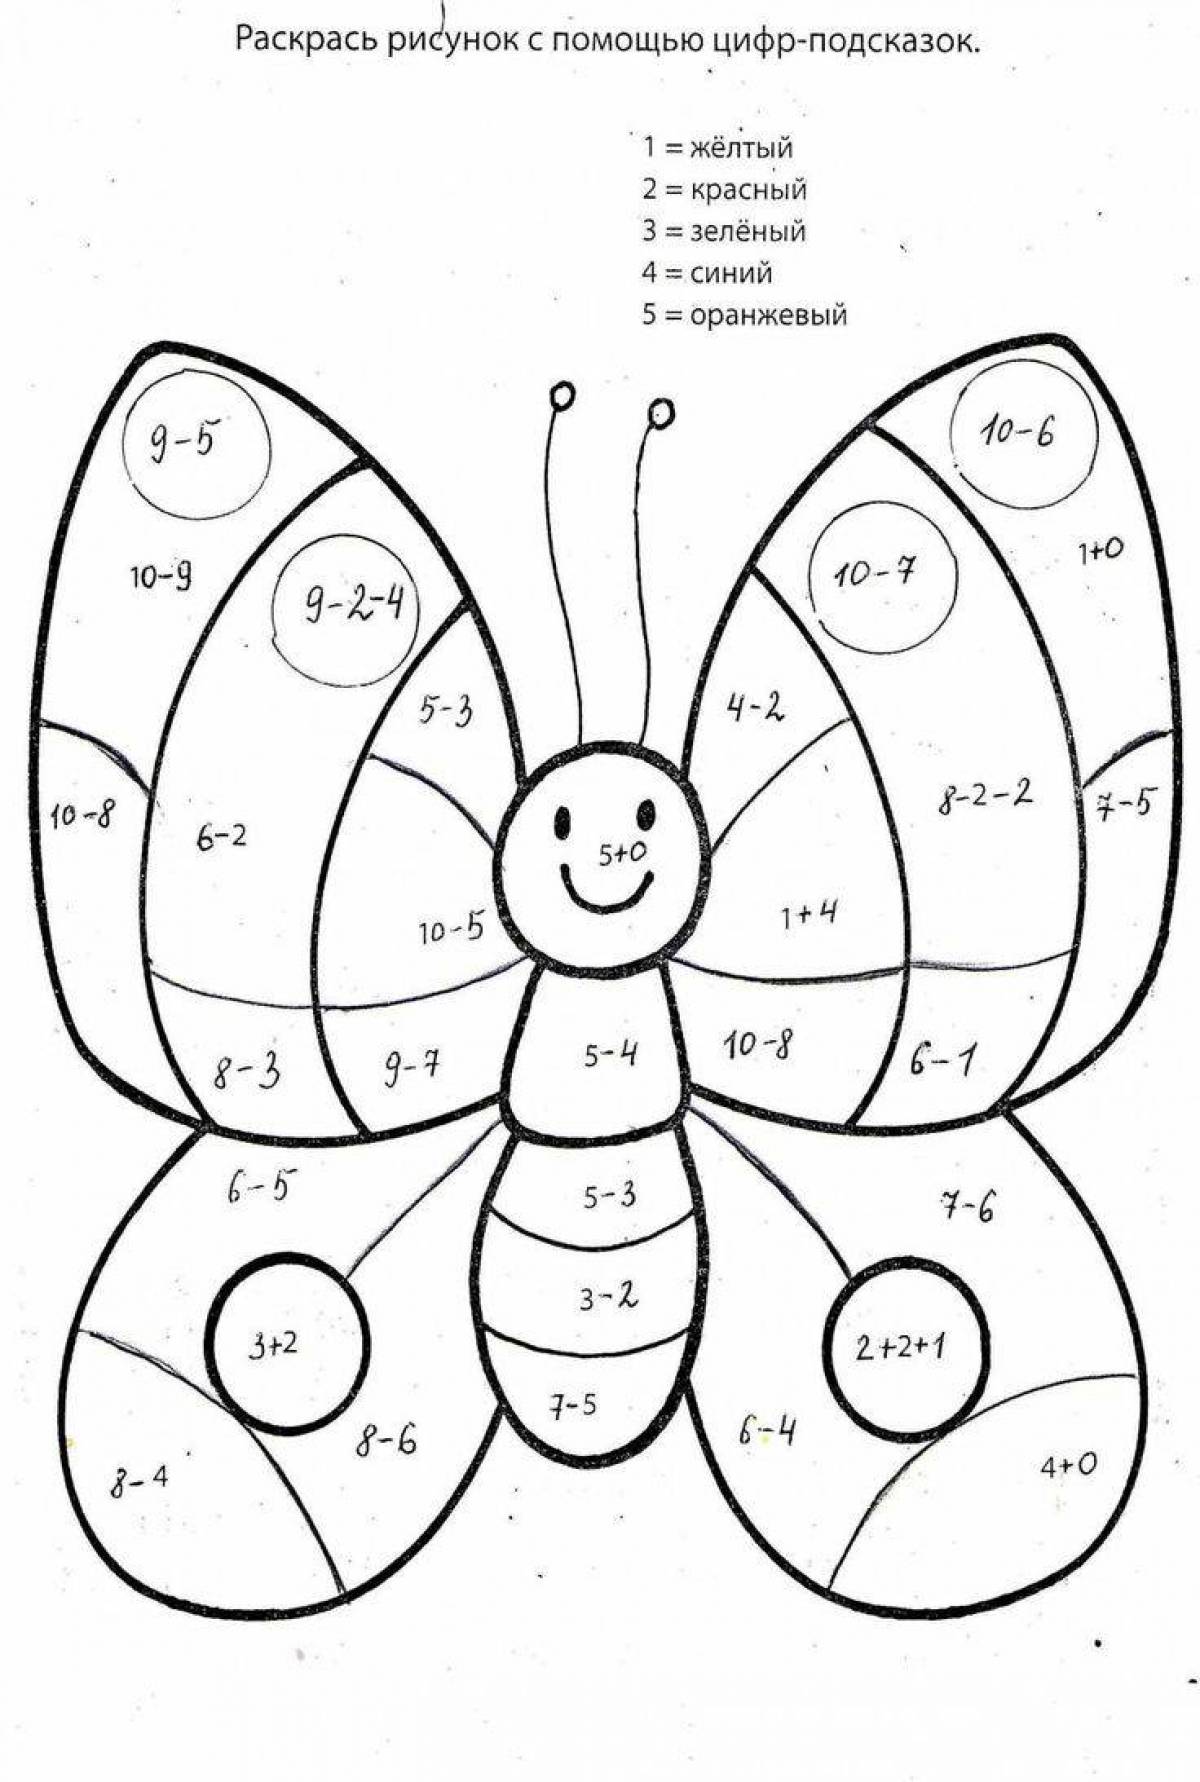 Cheerful coloring up to 10 for grade 1